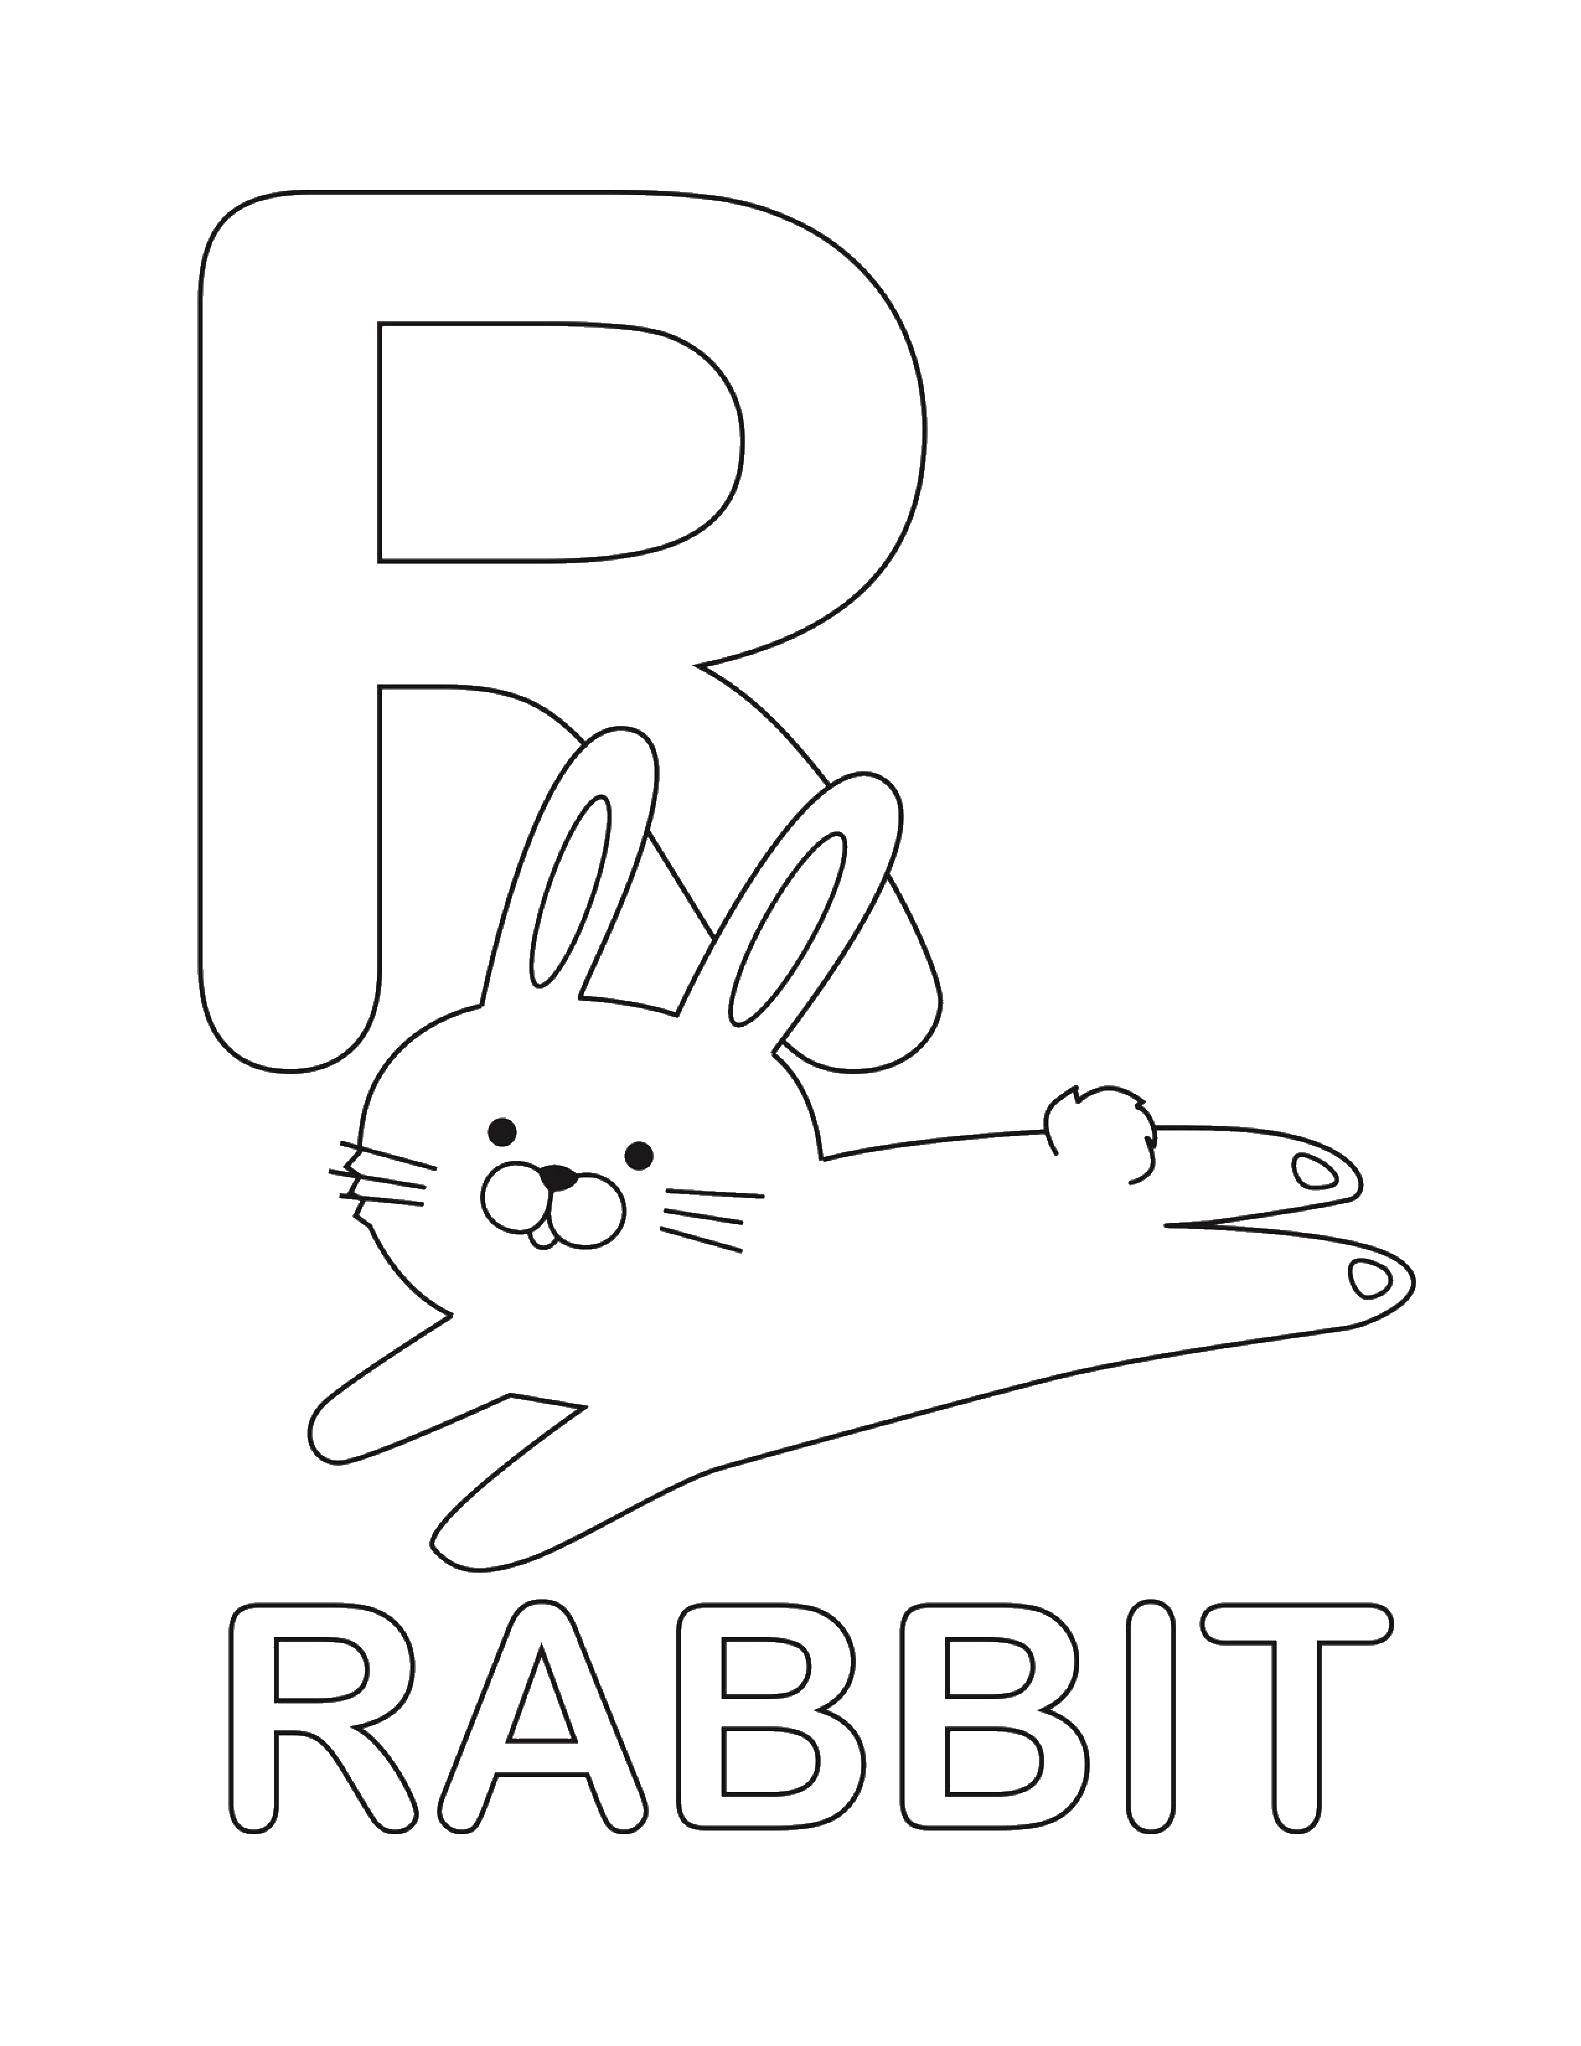 Coloring Rabbit. Category English words. Tags:  the English word rabbit.